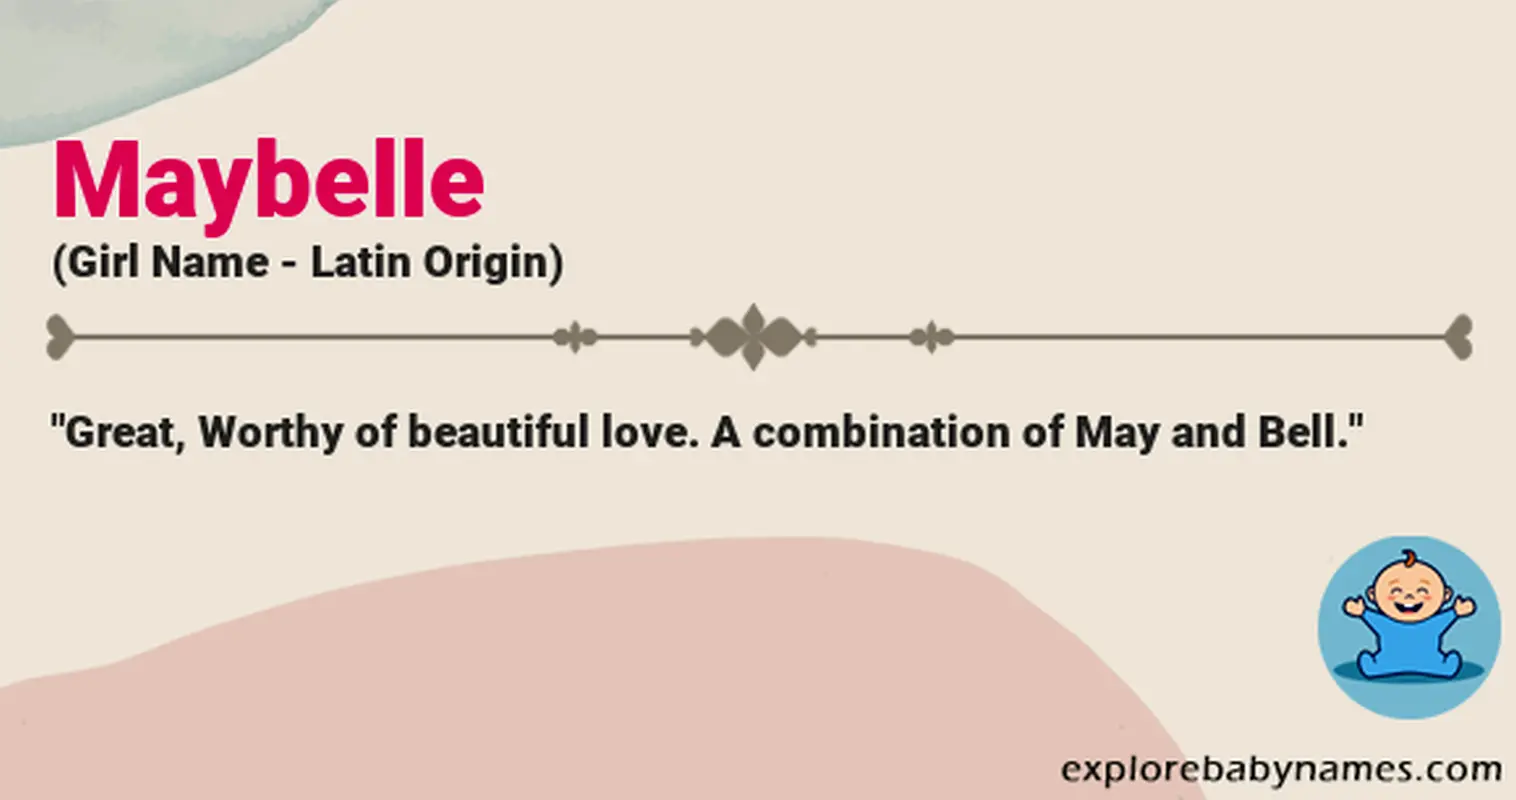 Meaning of Maybelle